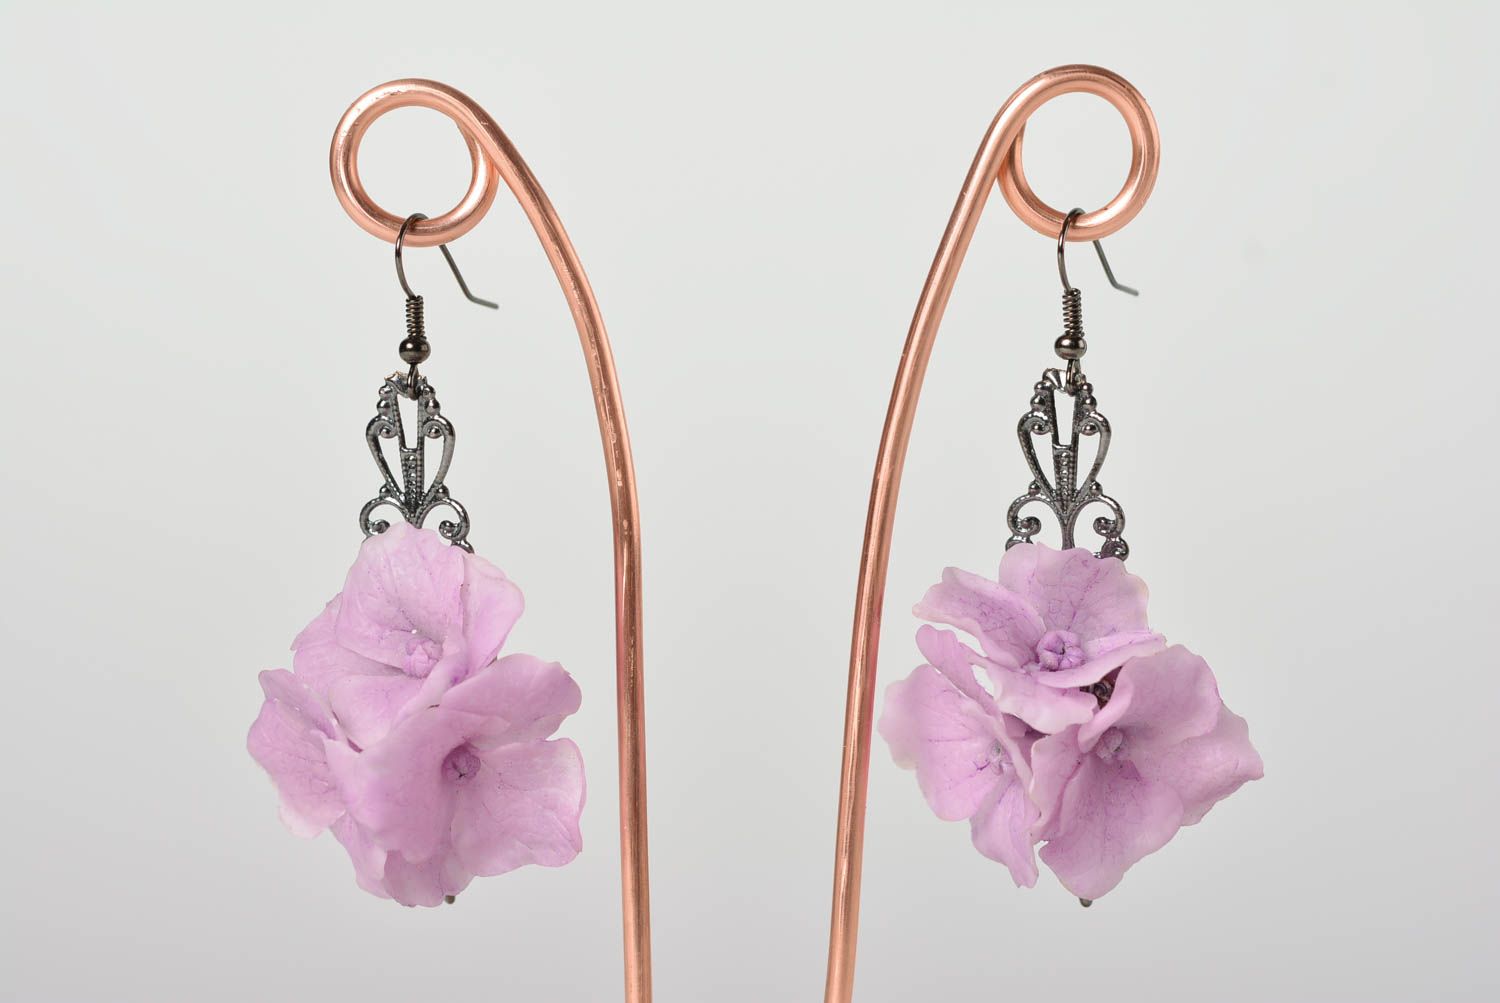 Acrylic drop earrings with pink flowers for women 0,03 lb with metal wires photo 1